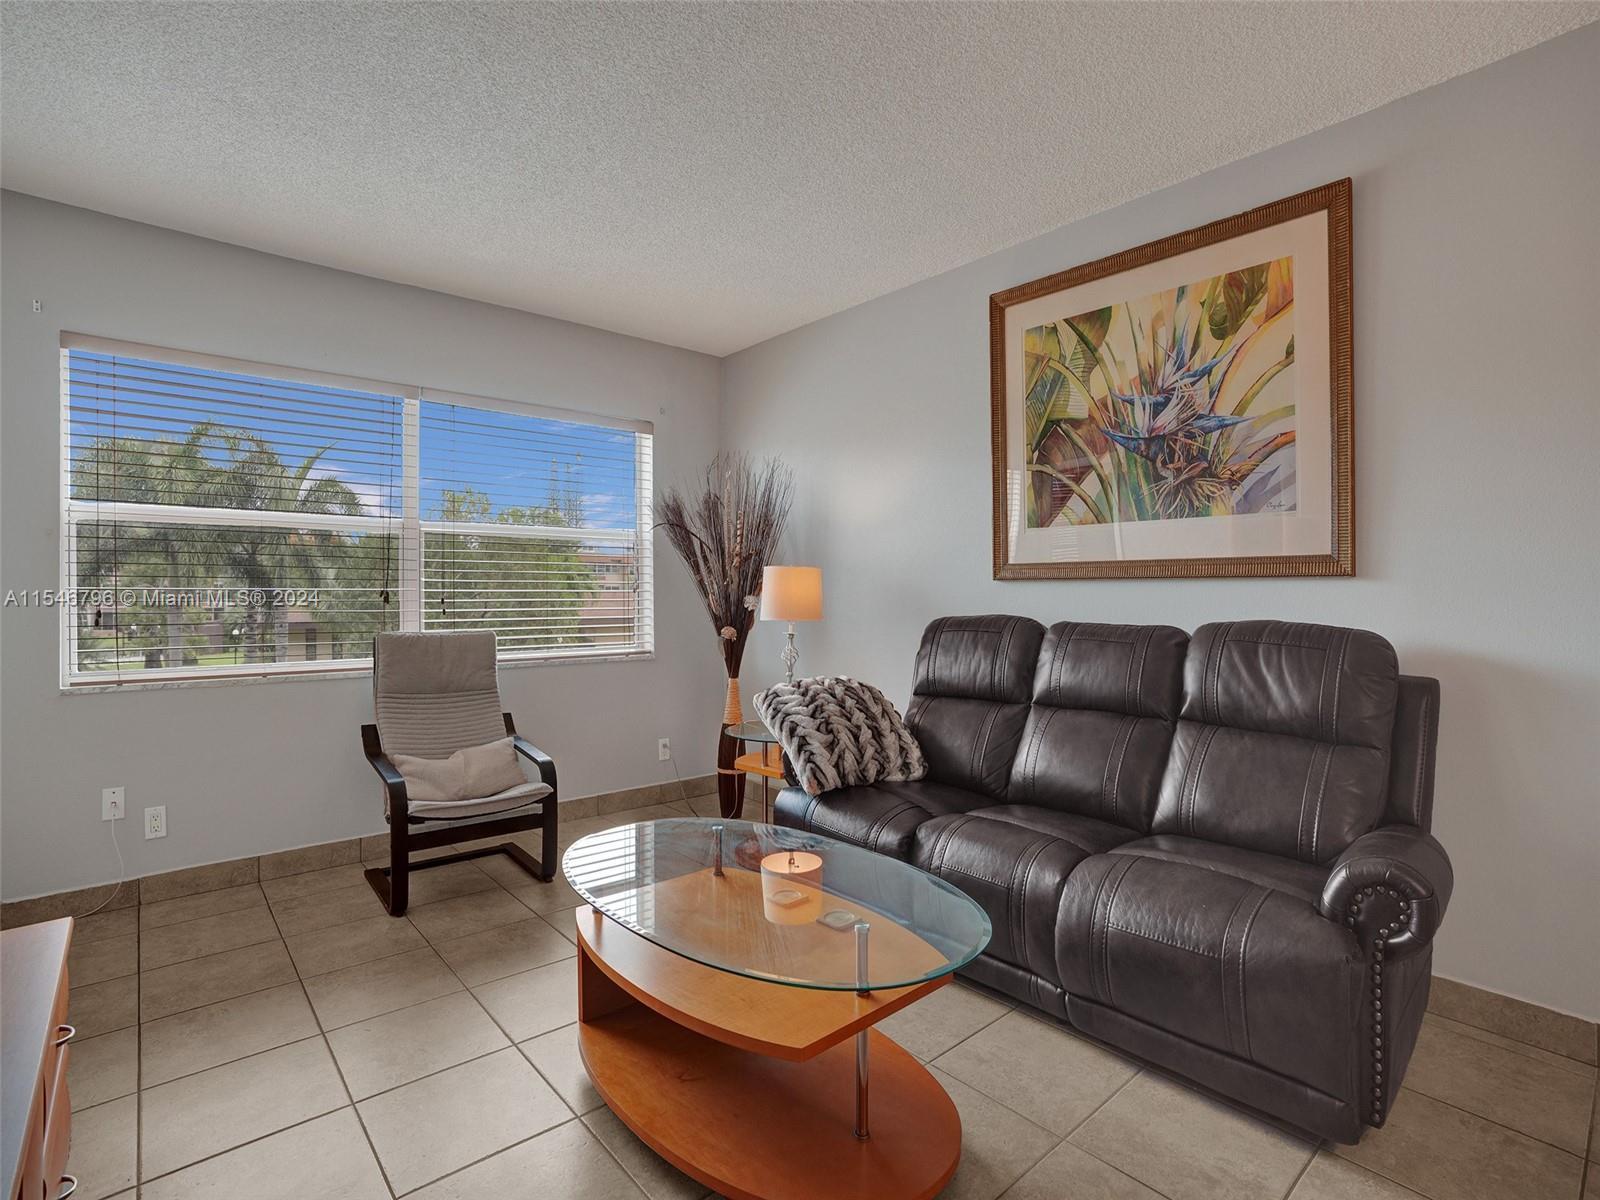 Photo of 3506 NW 49th Ave #508 in Lauderdale Lakes, FL